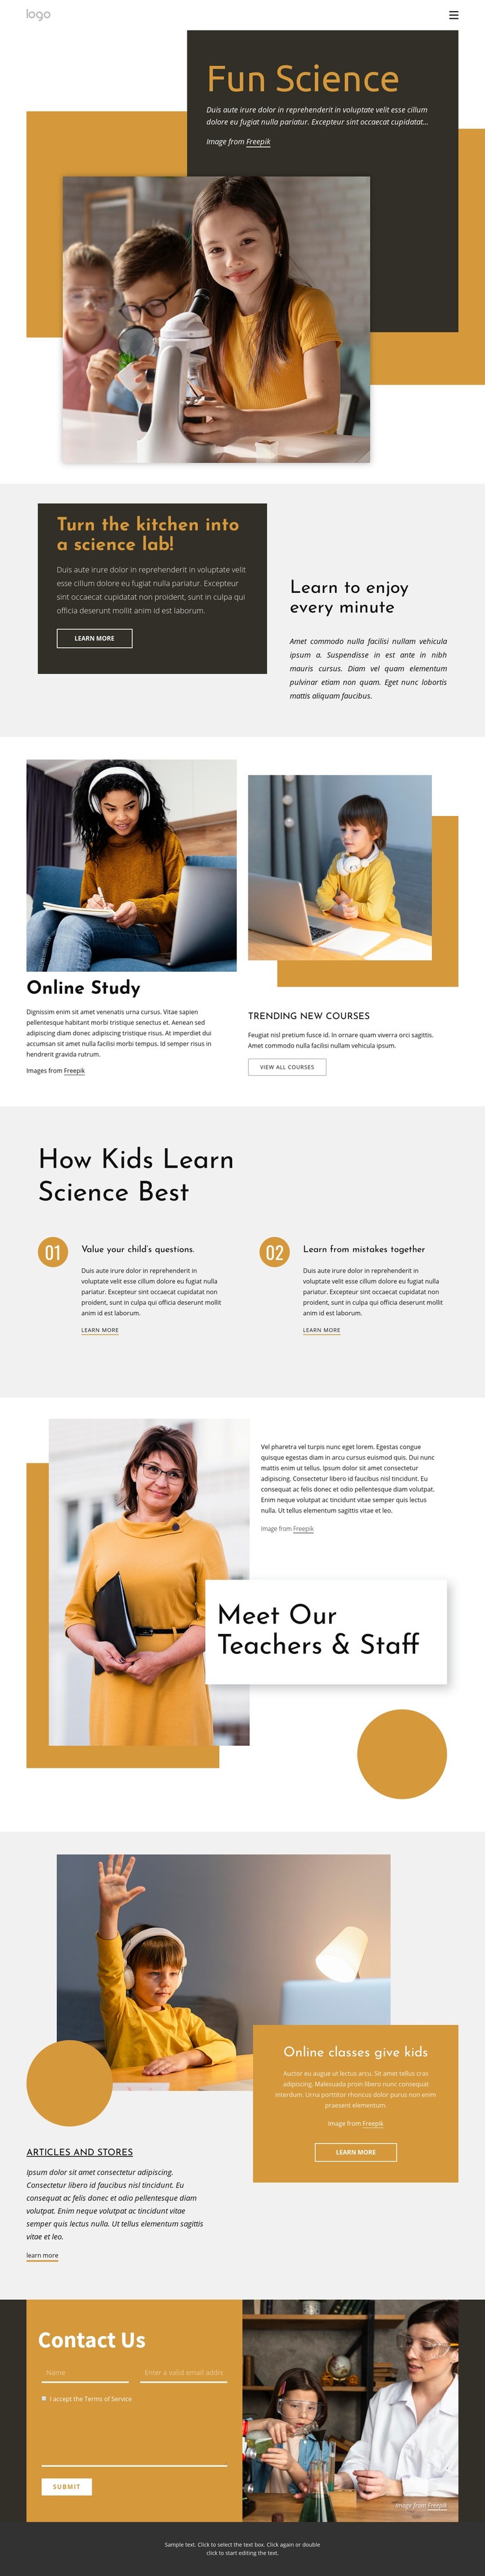 Cool science project Web Page Design